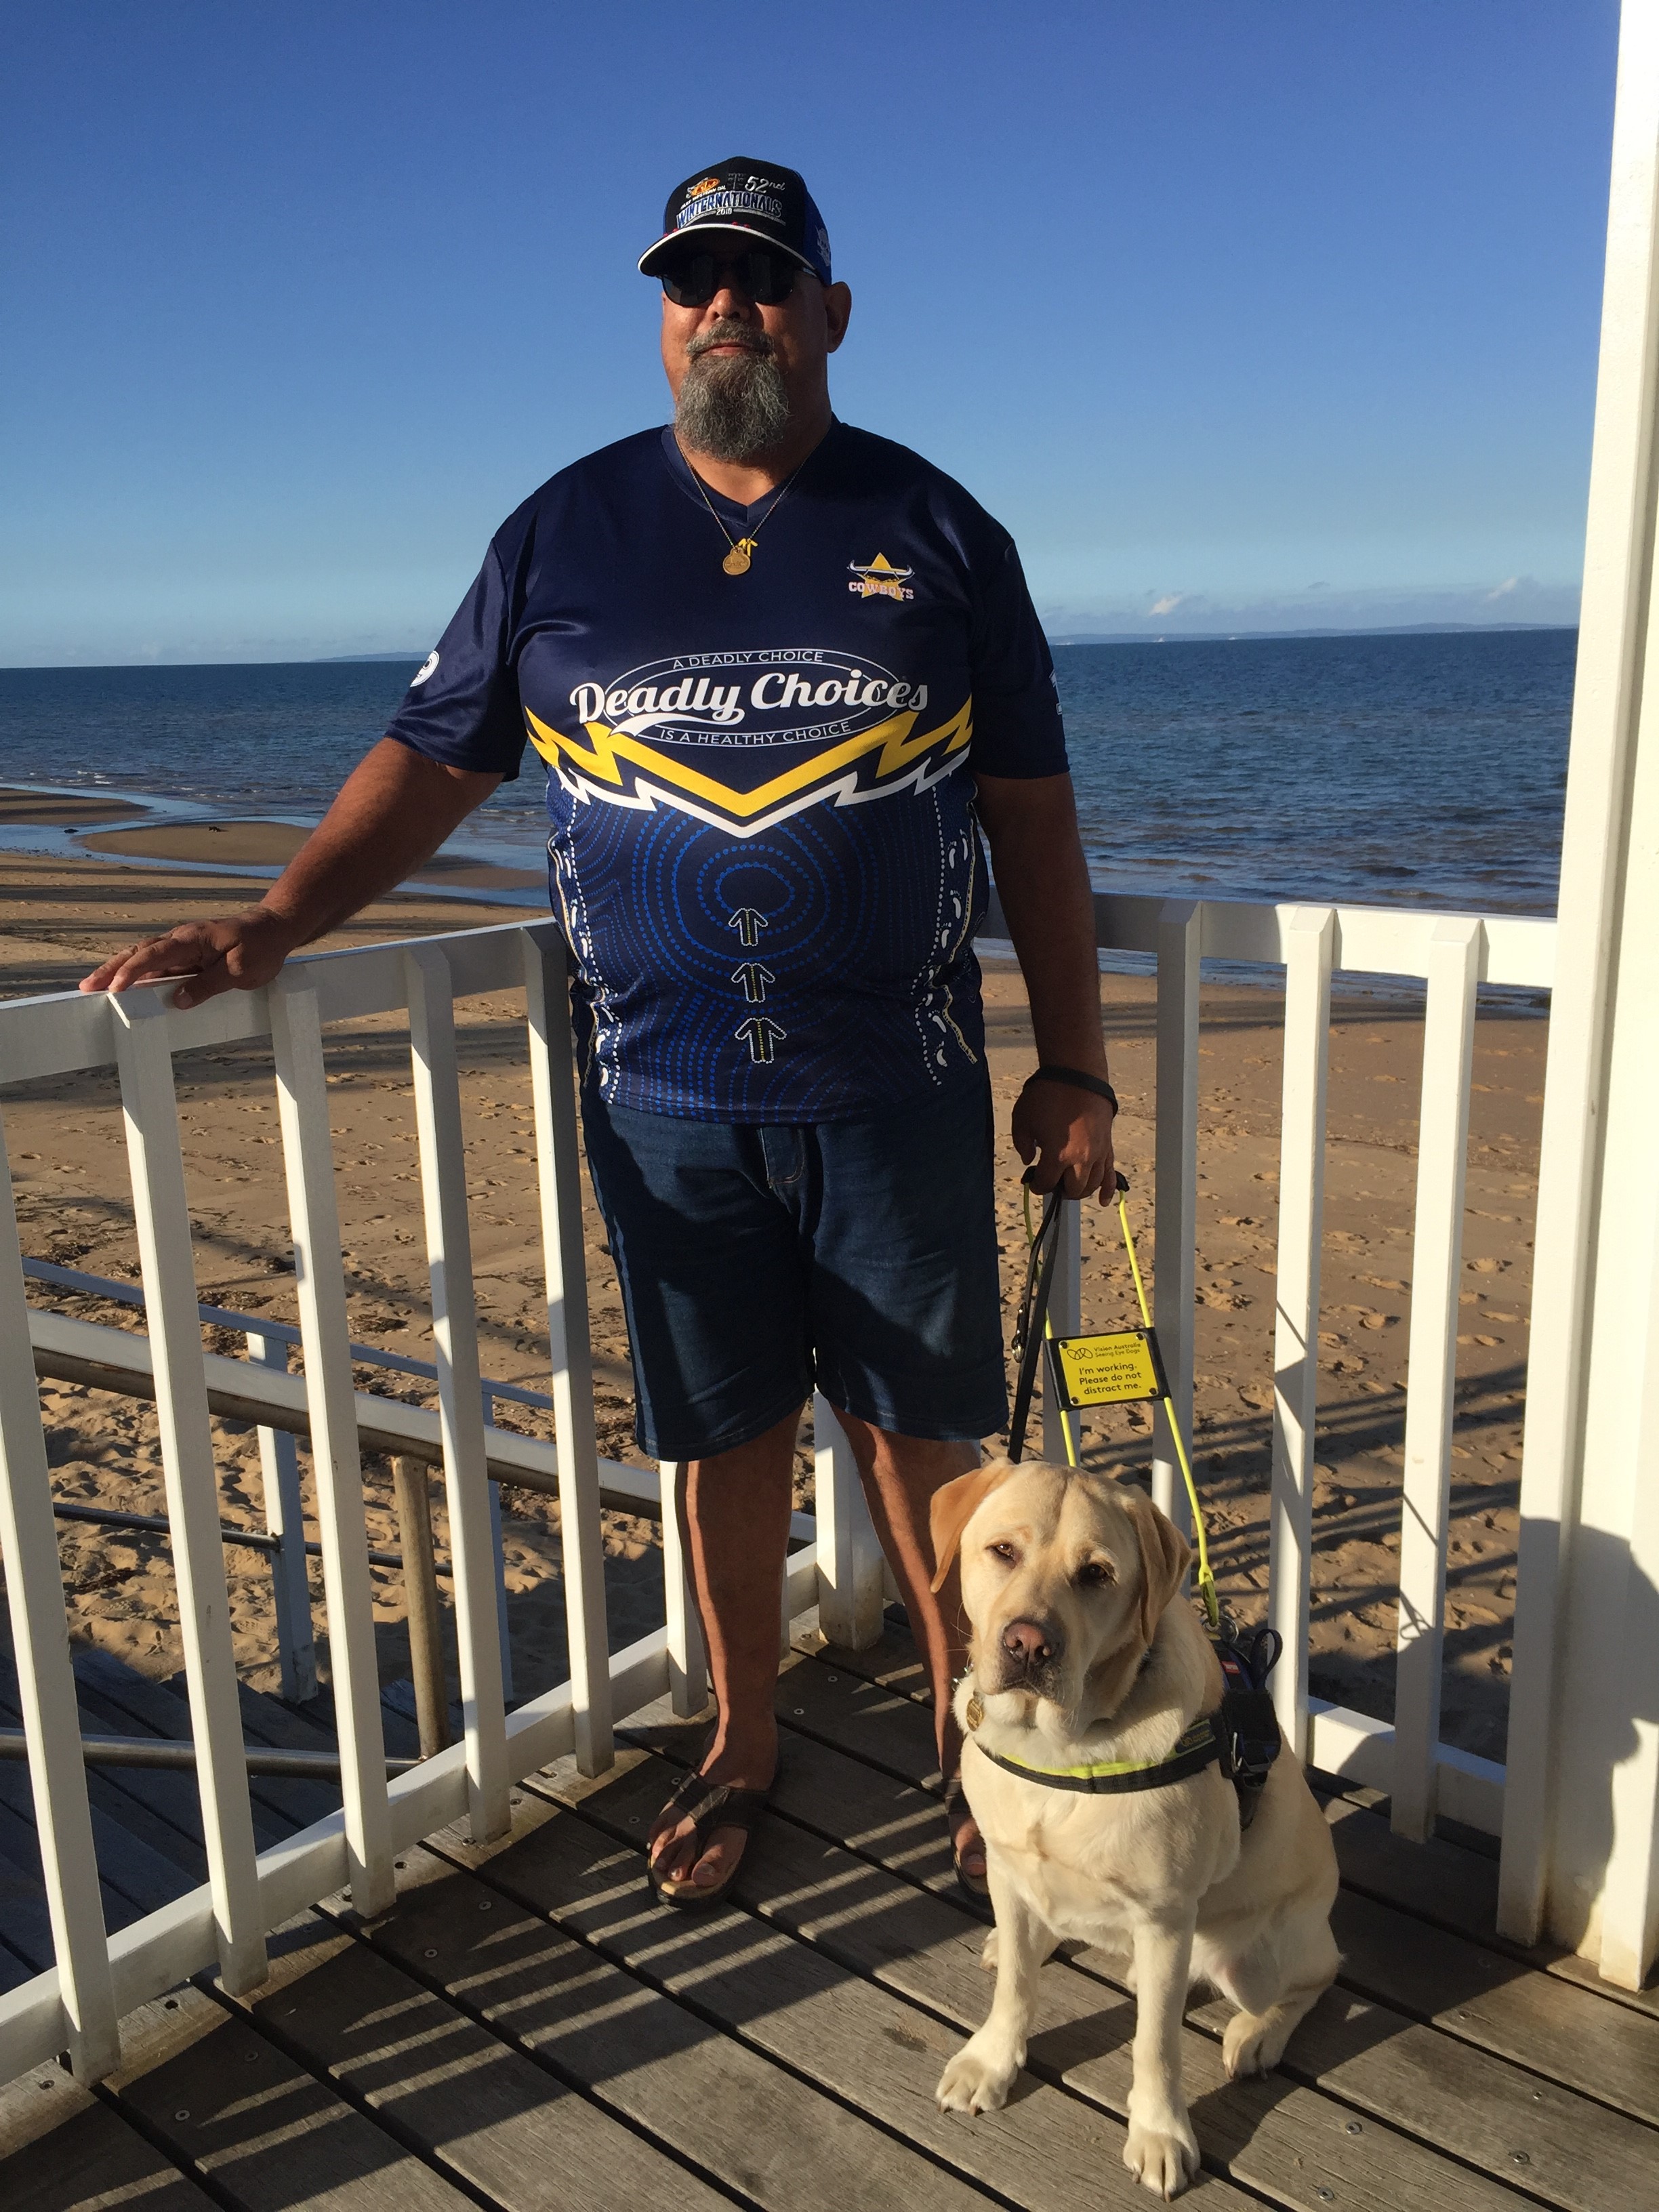 Alan stands on a beach with his Seeing Eye Dog Xenon